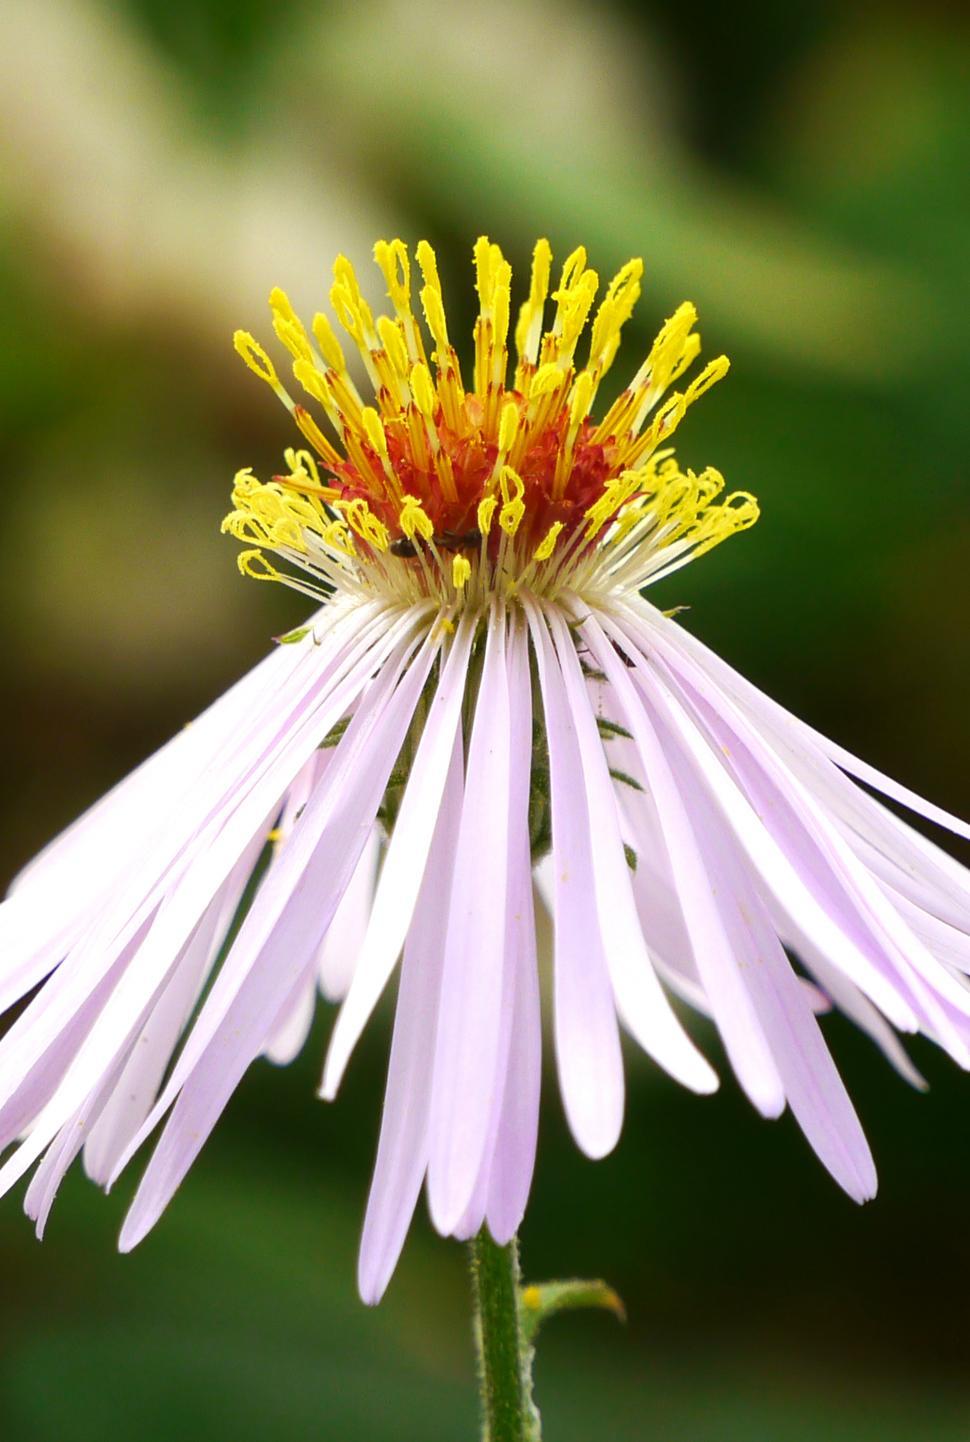 Free Image of Aster Flower Bloom Closeup 